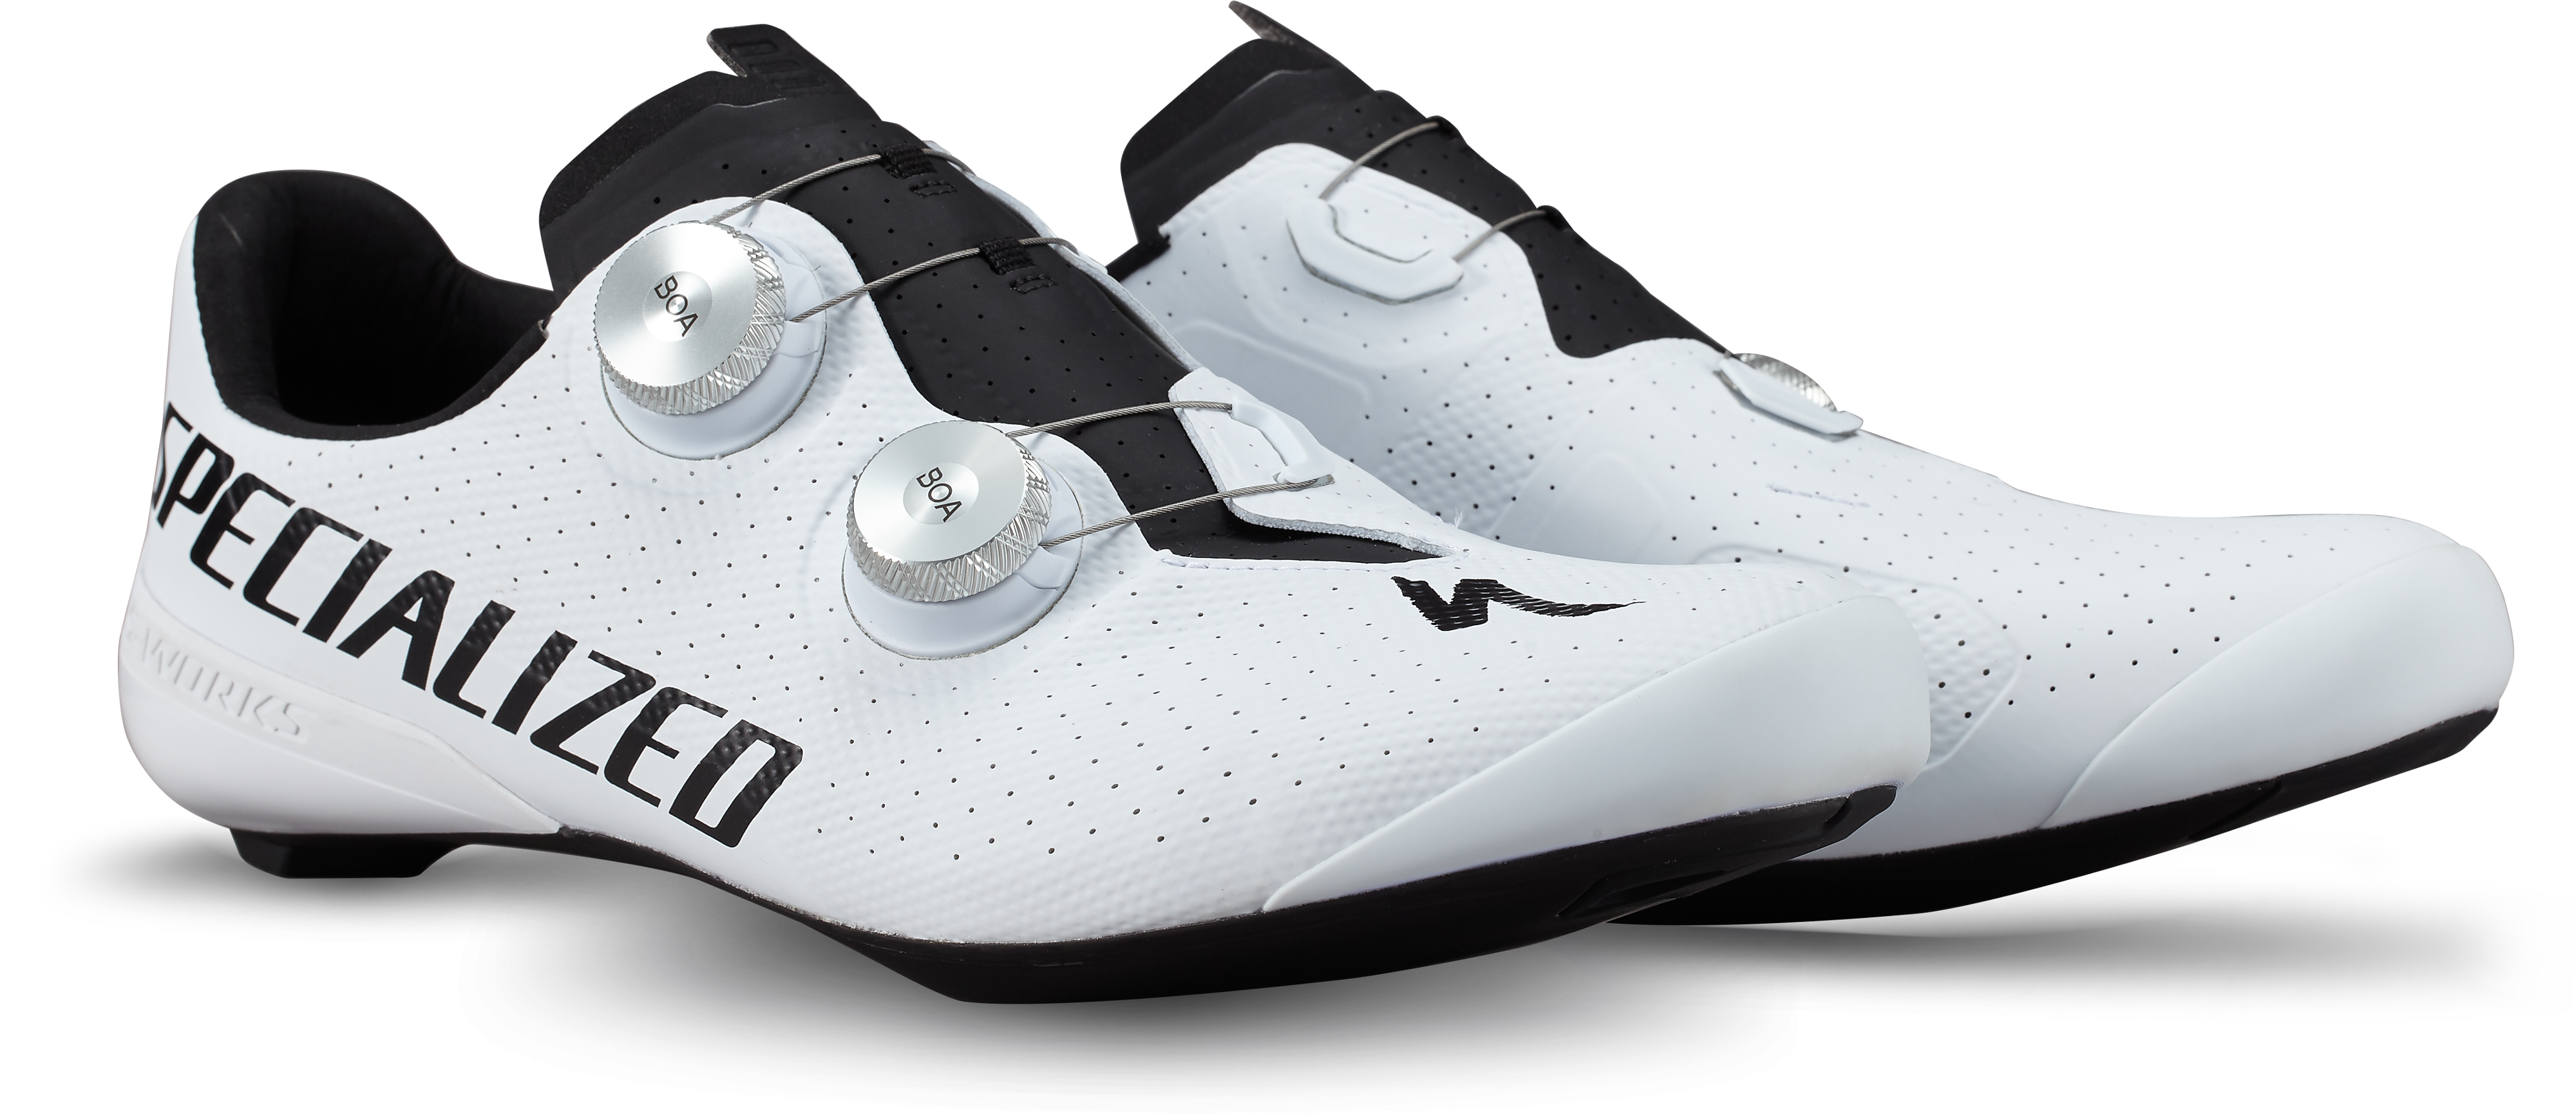 S-WORKS TORCH ROAD SHOES TEAM WHT 41(41 (26cm) チームホワイト 